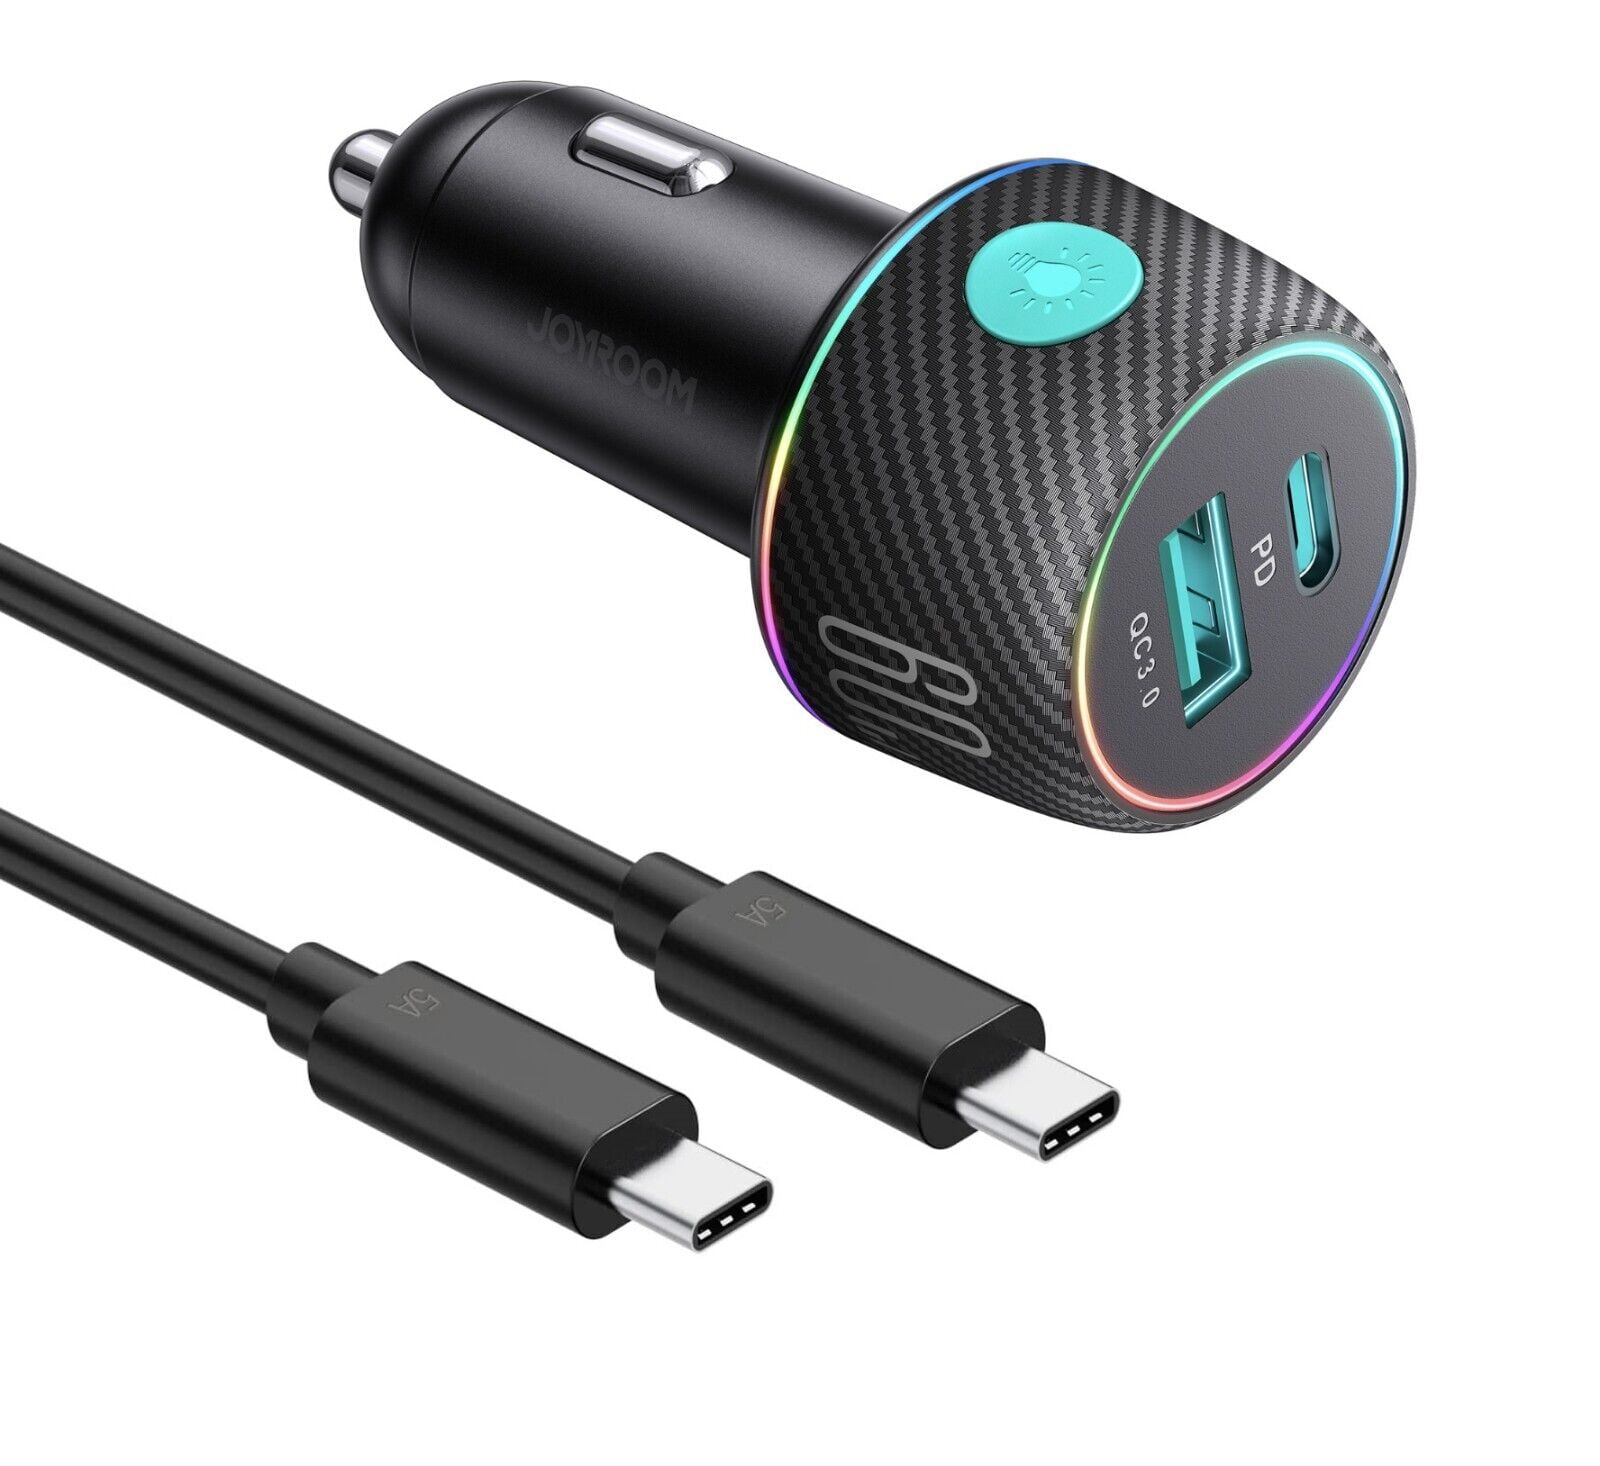 Anker USB C Car Charger, 30W 2-Port Type C Fast Car Charger in East Legon -  Accessories & Supplies for Electronics, Nerdtech Gamers